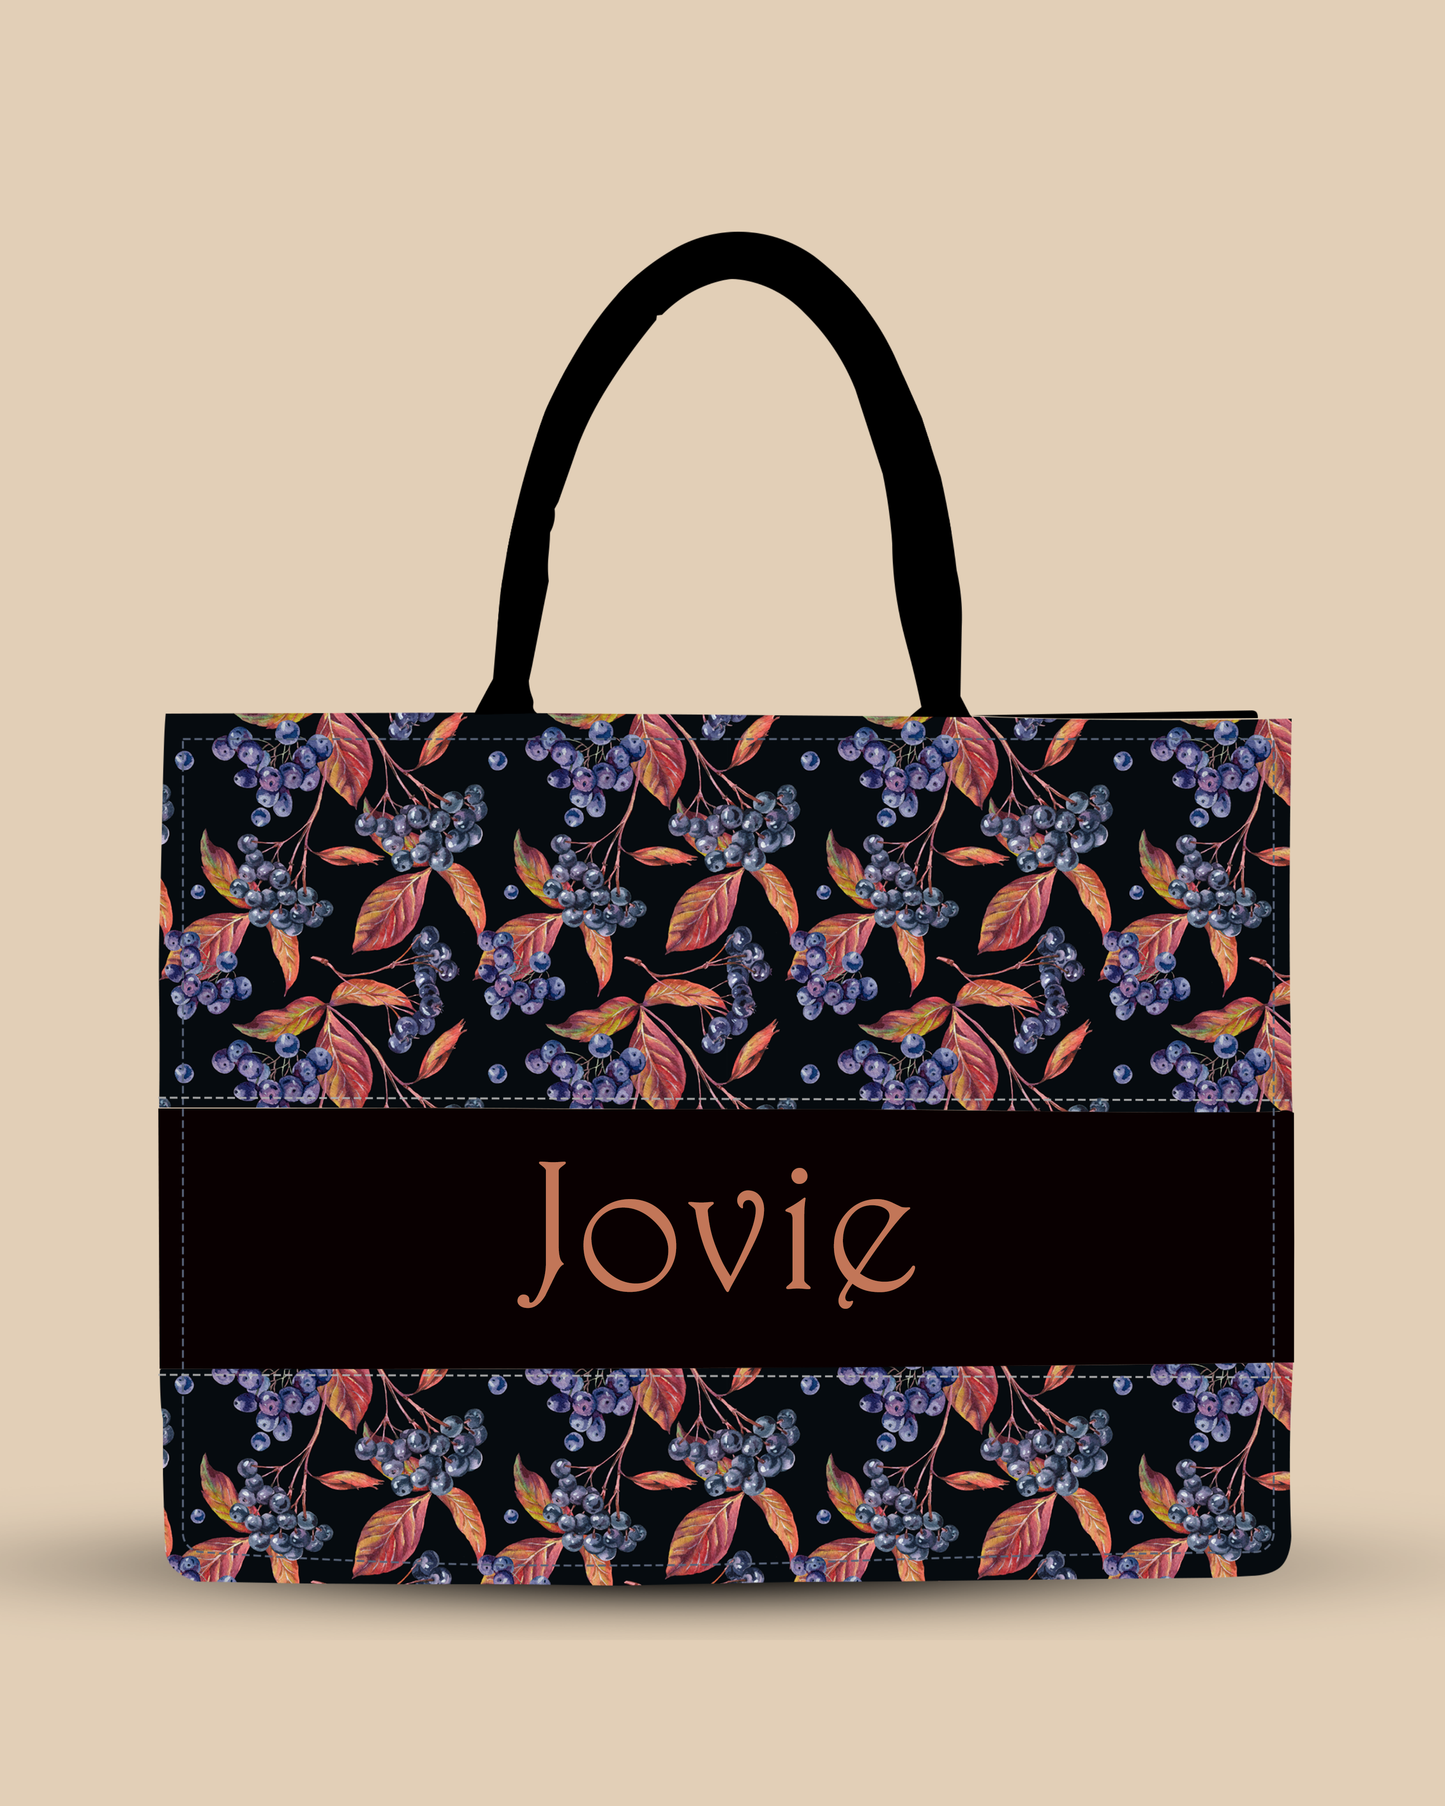 Personalized Tote Bag Designed with Grapes And Leaf Pattern